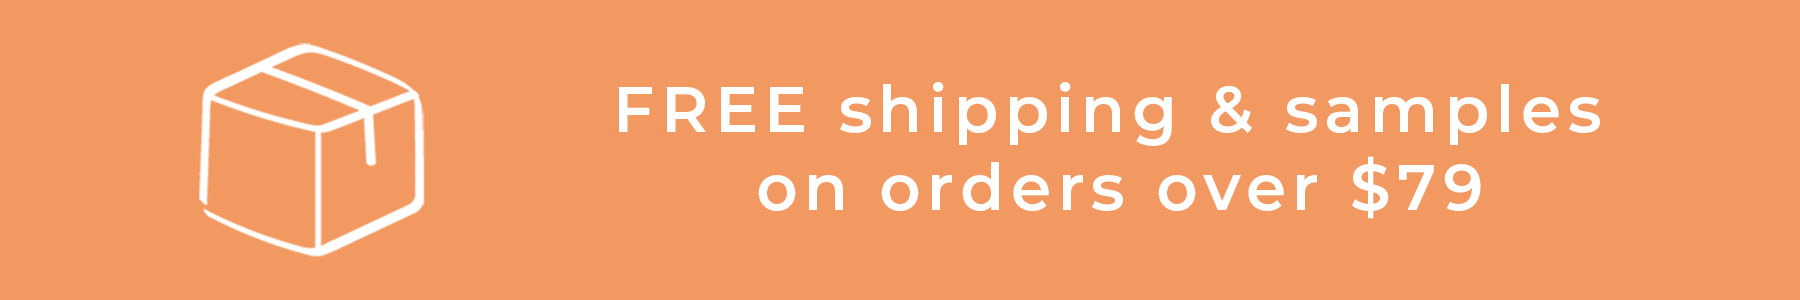 Free Shipping Notice